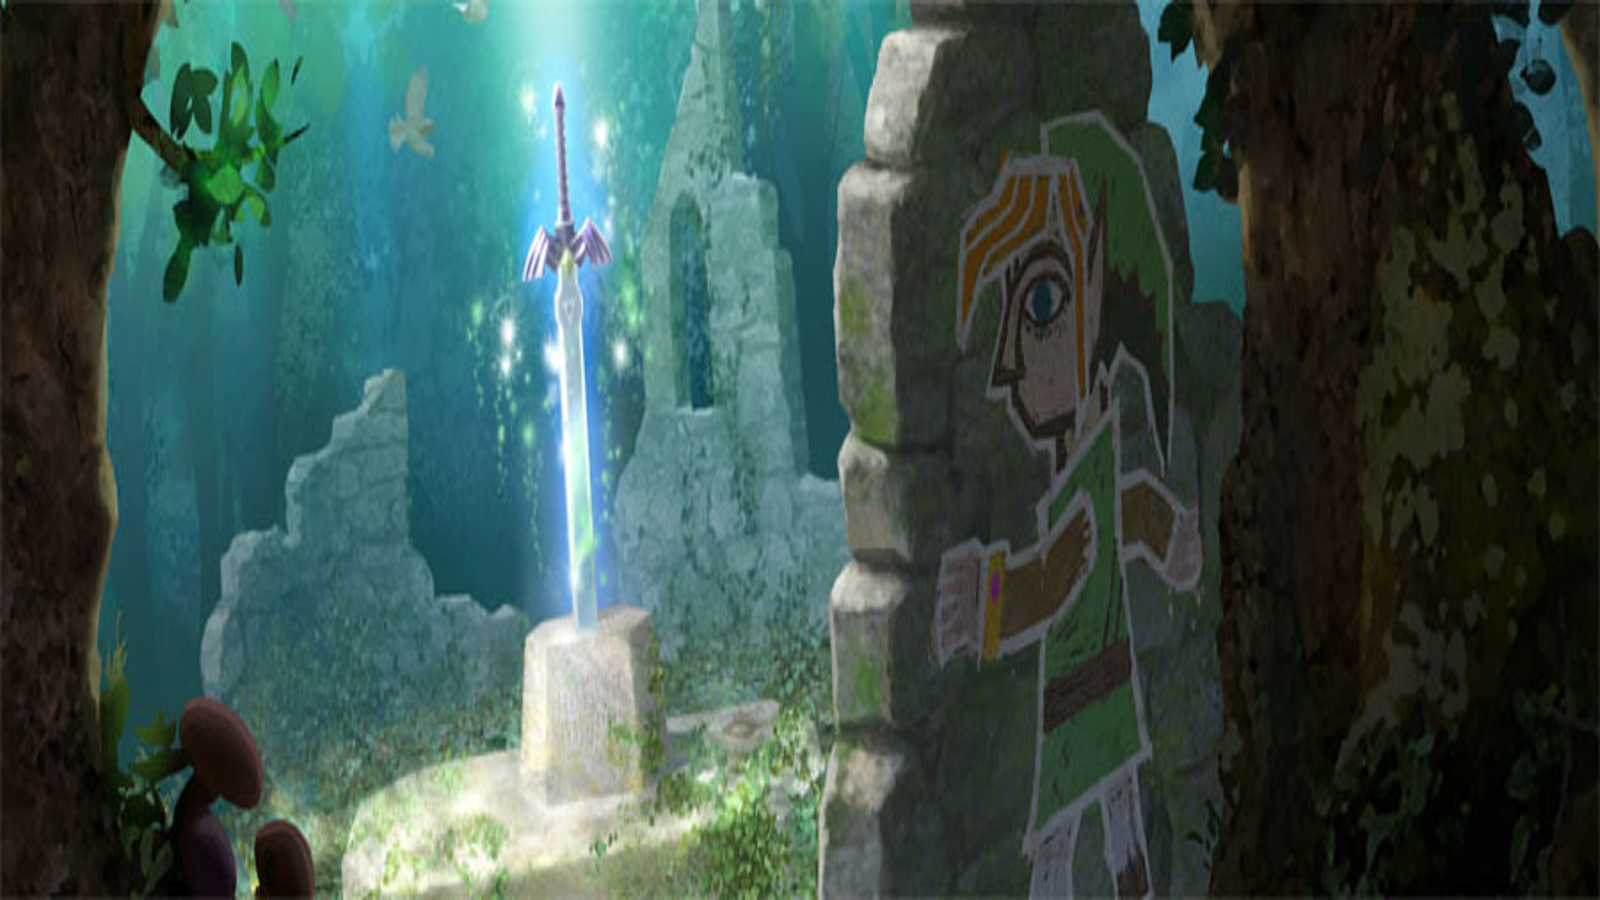 The Legend of Zelda: A Link Between Worlds review: as a picture